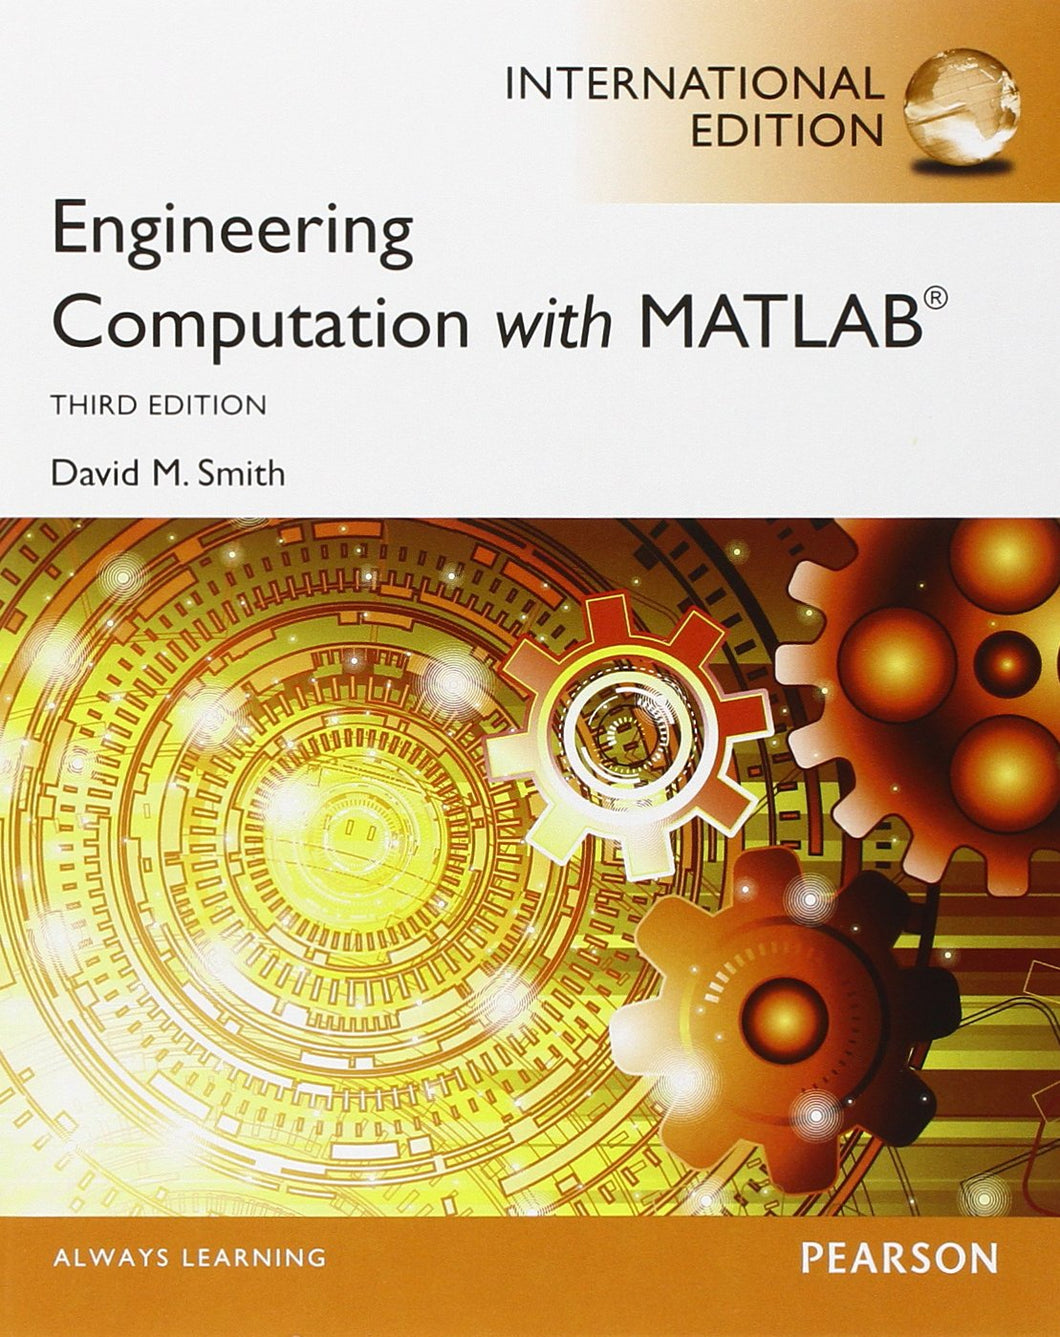 Engineering Computation with MATLAB [Paperback] 3e by David Smith